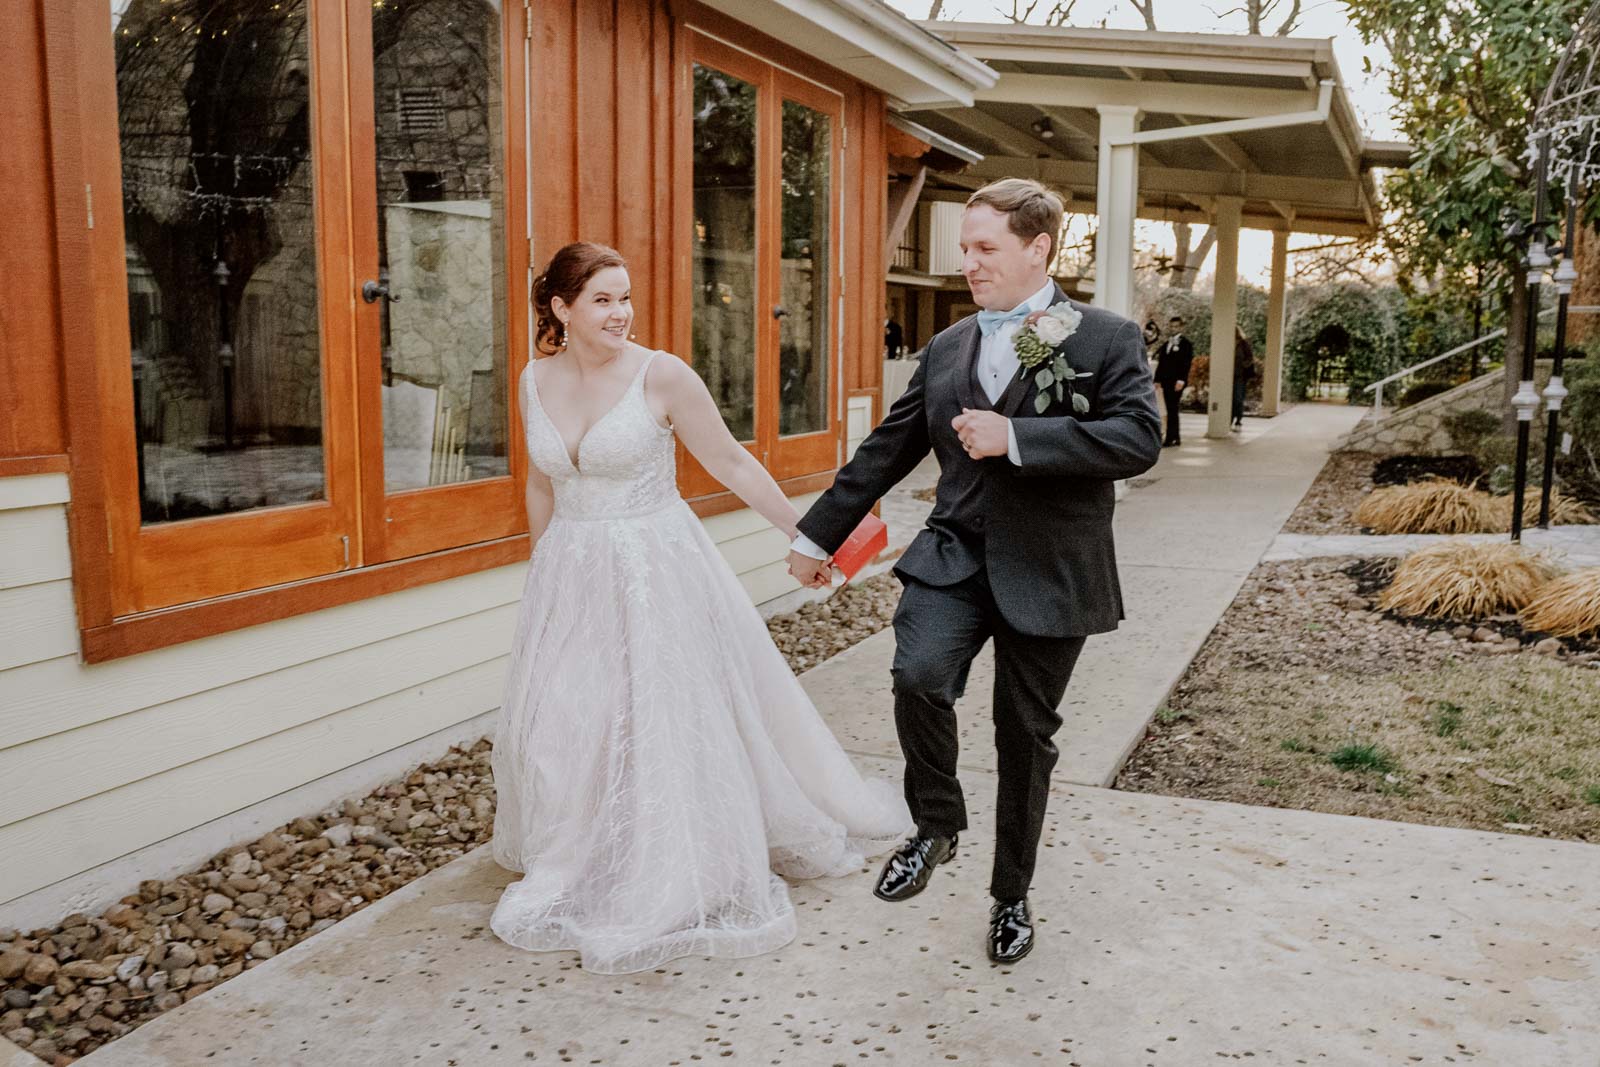 A couple trot and jump in the air in a funny moment as they leave or exit the wedding venue with family members in the background in the late winter wedding